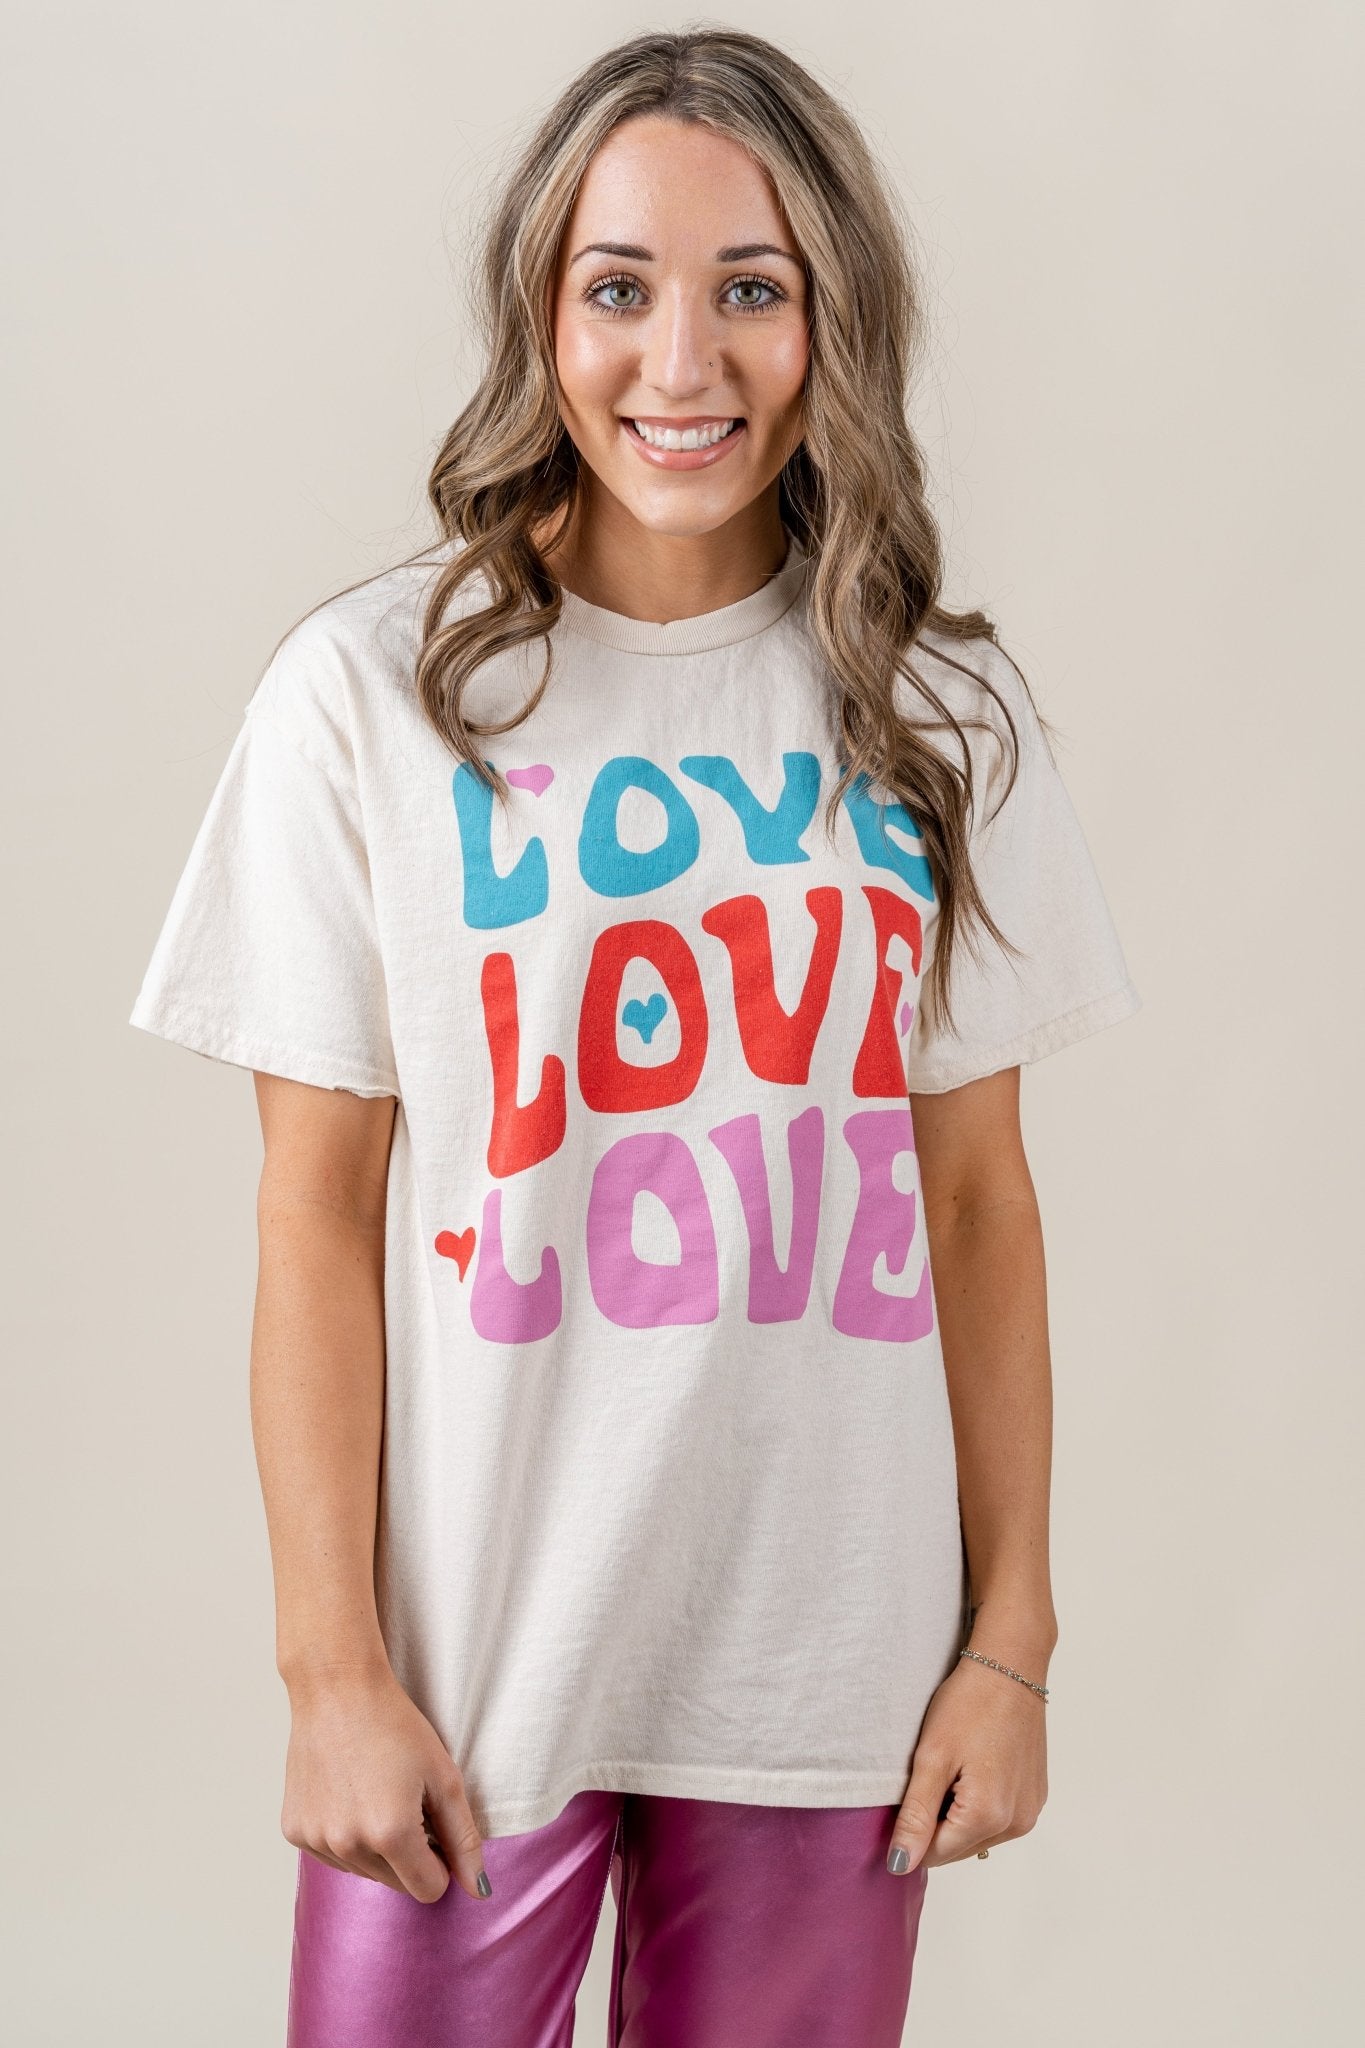 Love repeat thrifted t-shirt off white - Cute Valentine's Day Outfits at Lush Fashion Lounge Boutique in Oklahoma City